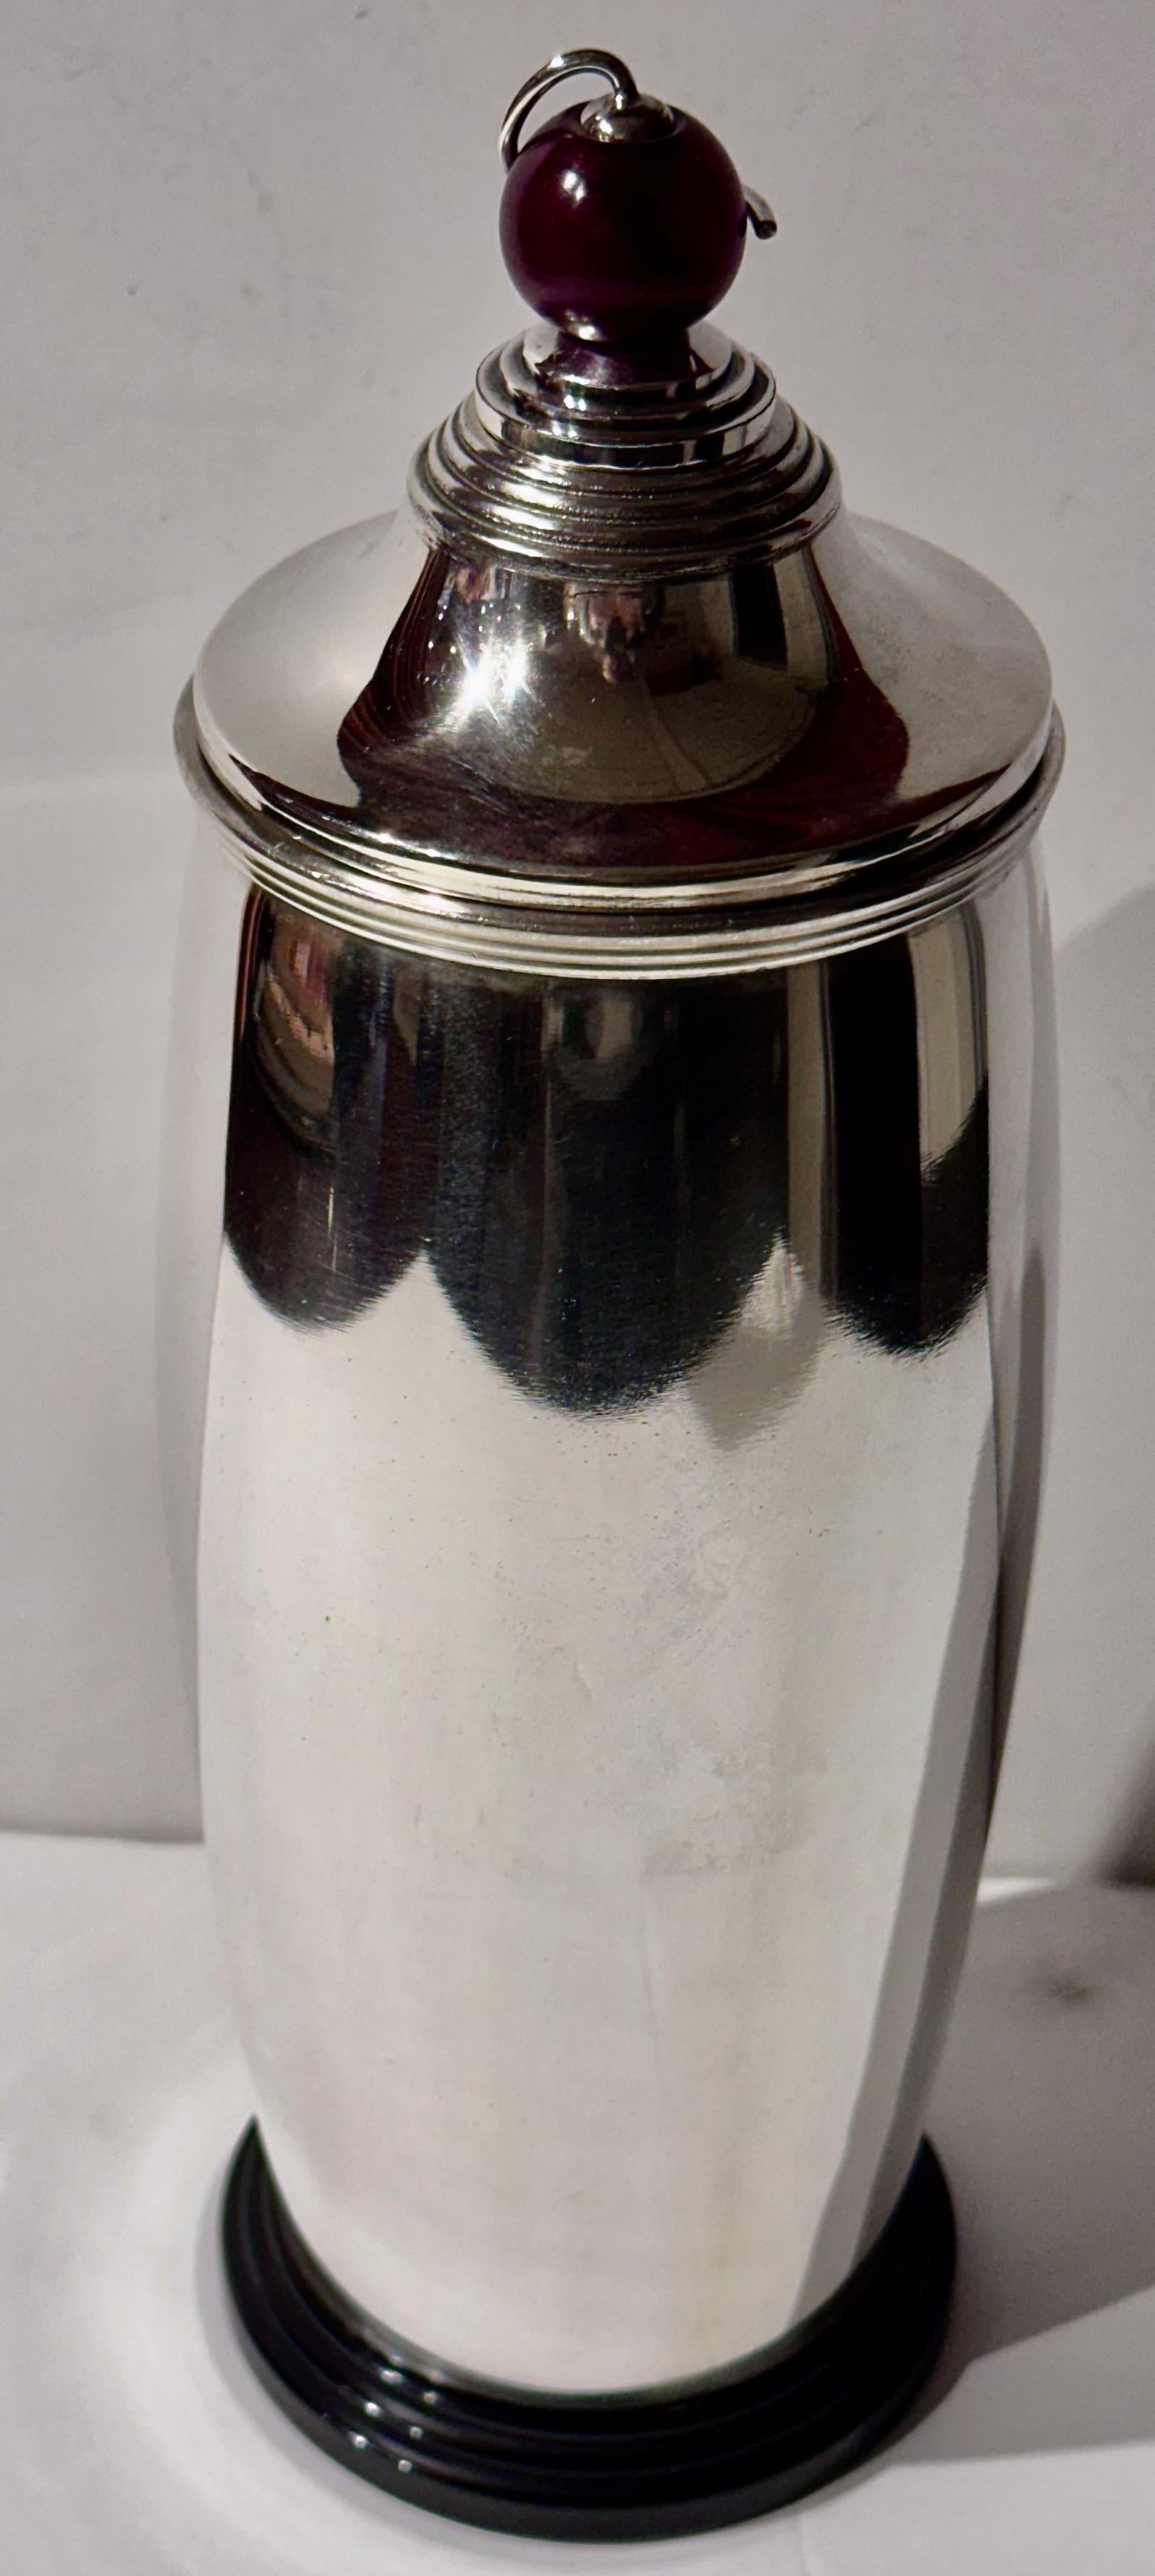 This 1927 Meriden International Silver Cocktail Shaker with an Amber Ball Top is a stunning example of functional art from the Art Deco period. The shaker’s standout feature is its unusual top, which adds an intriguing element to its